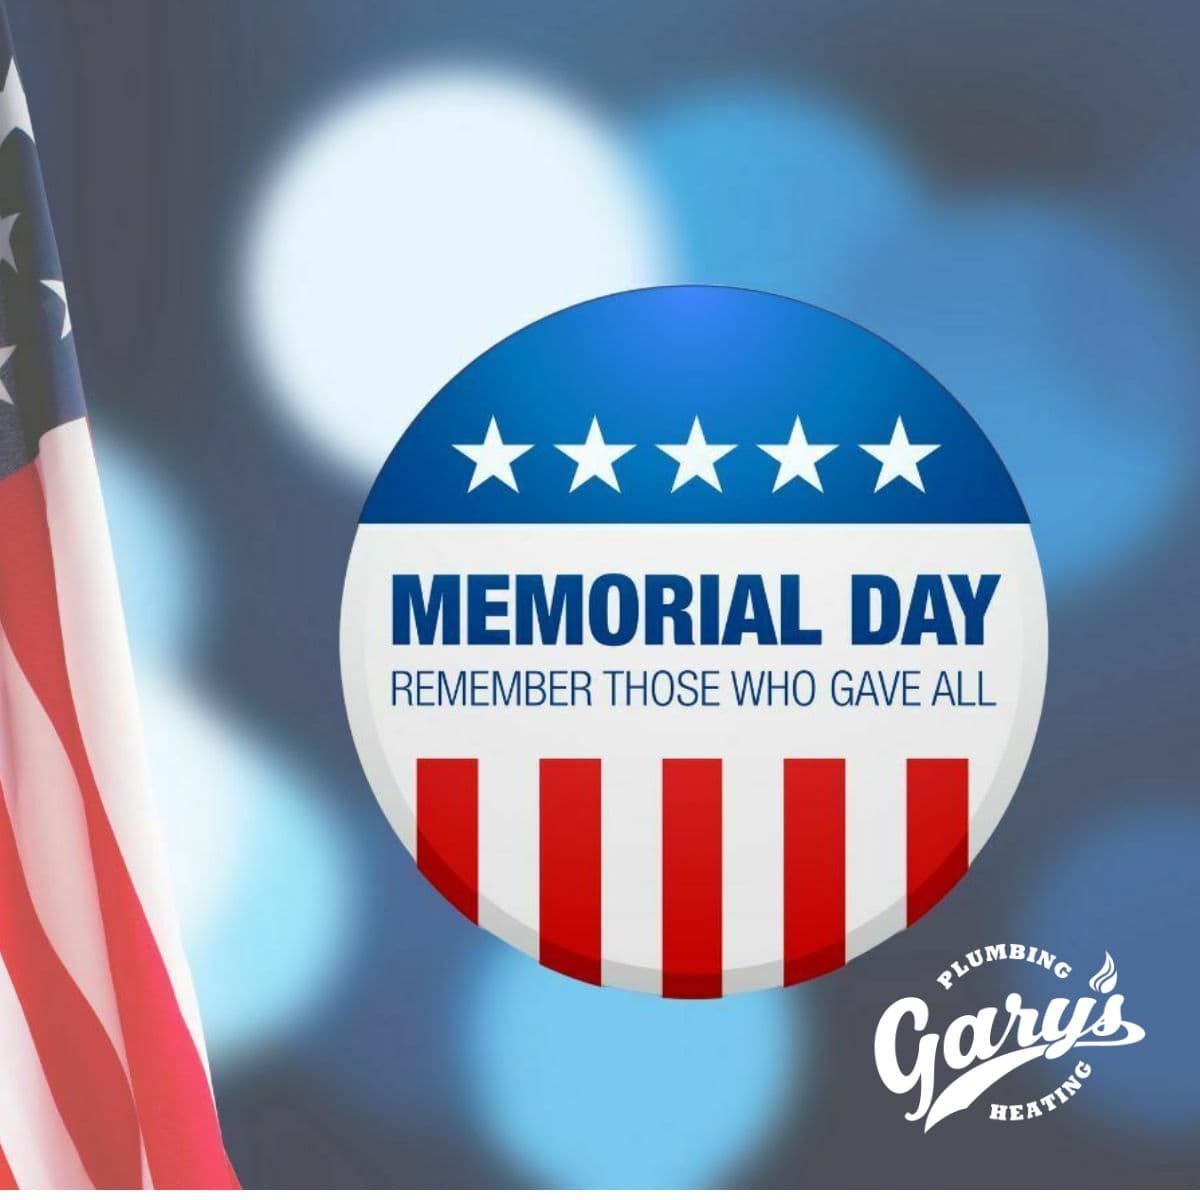 Honoring heroes this Memorial Day! Gary's Plumbing & Heating pays tribute to those who served. Enjoy your worry-free holiday with our no-extra-charge emergency plumbing services. garys.plumbing #MemorialDay #EmergencyPlumbing